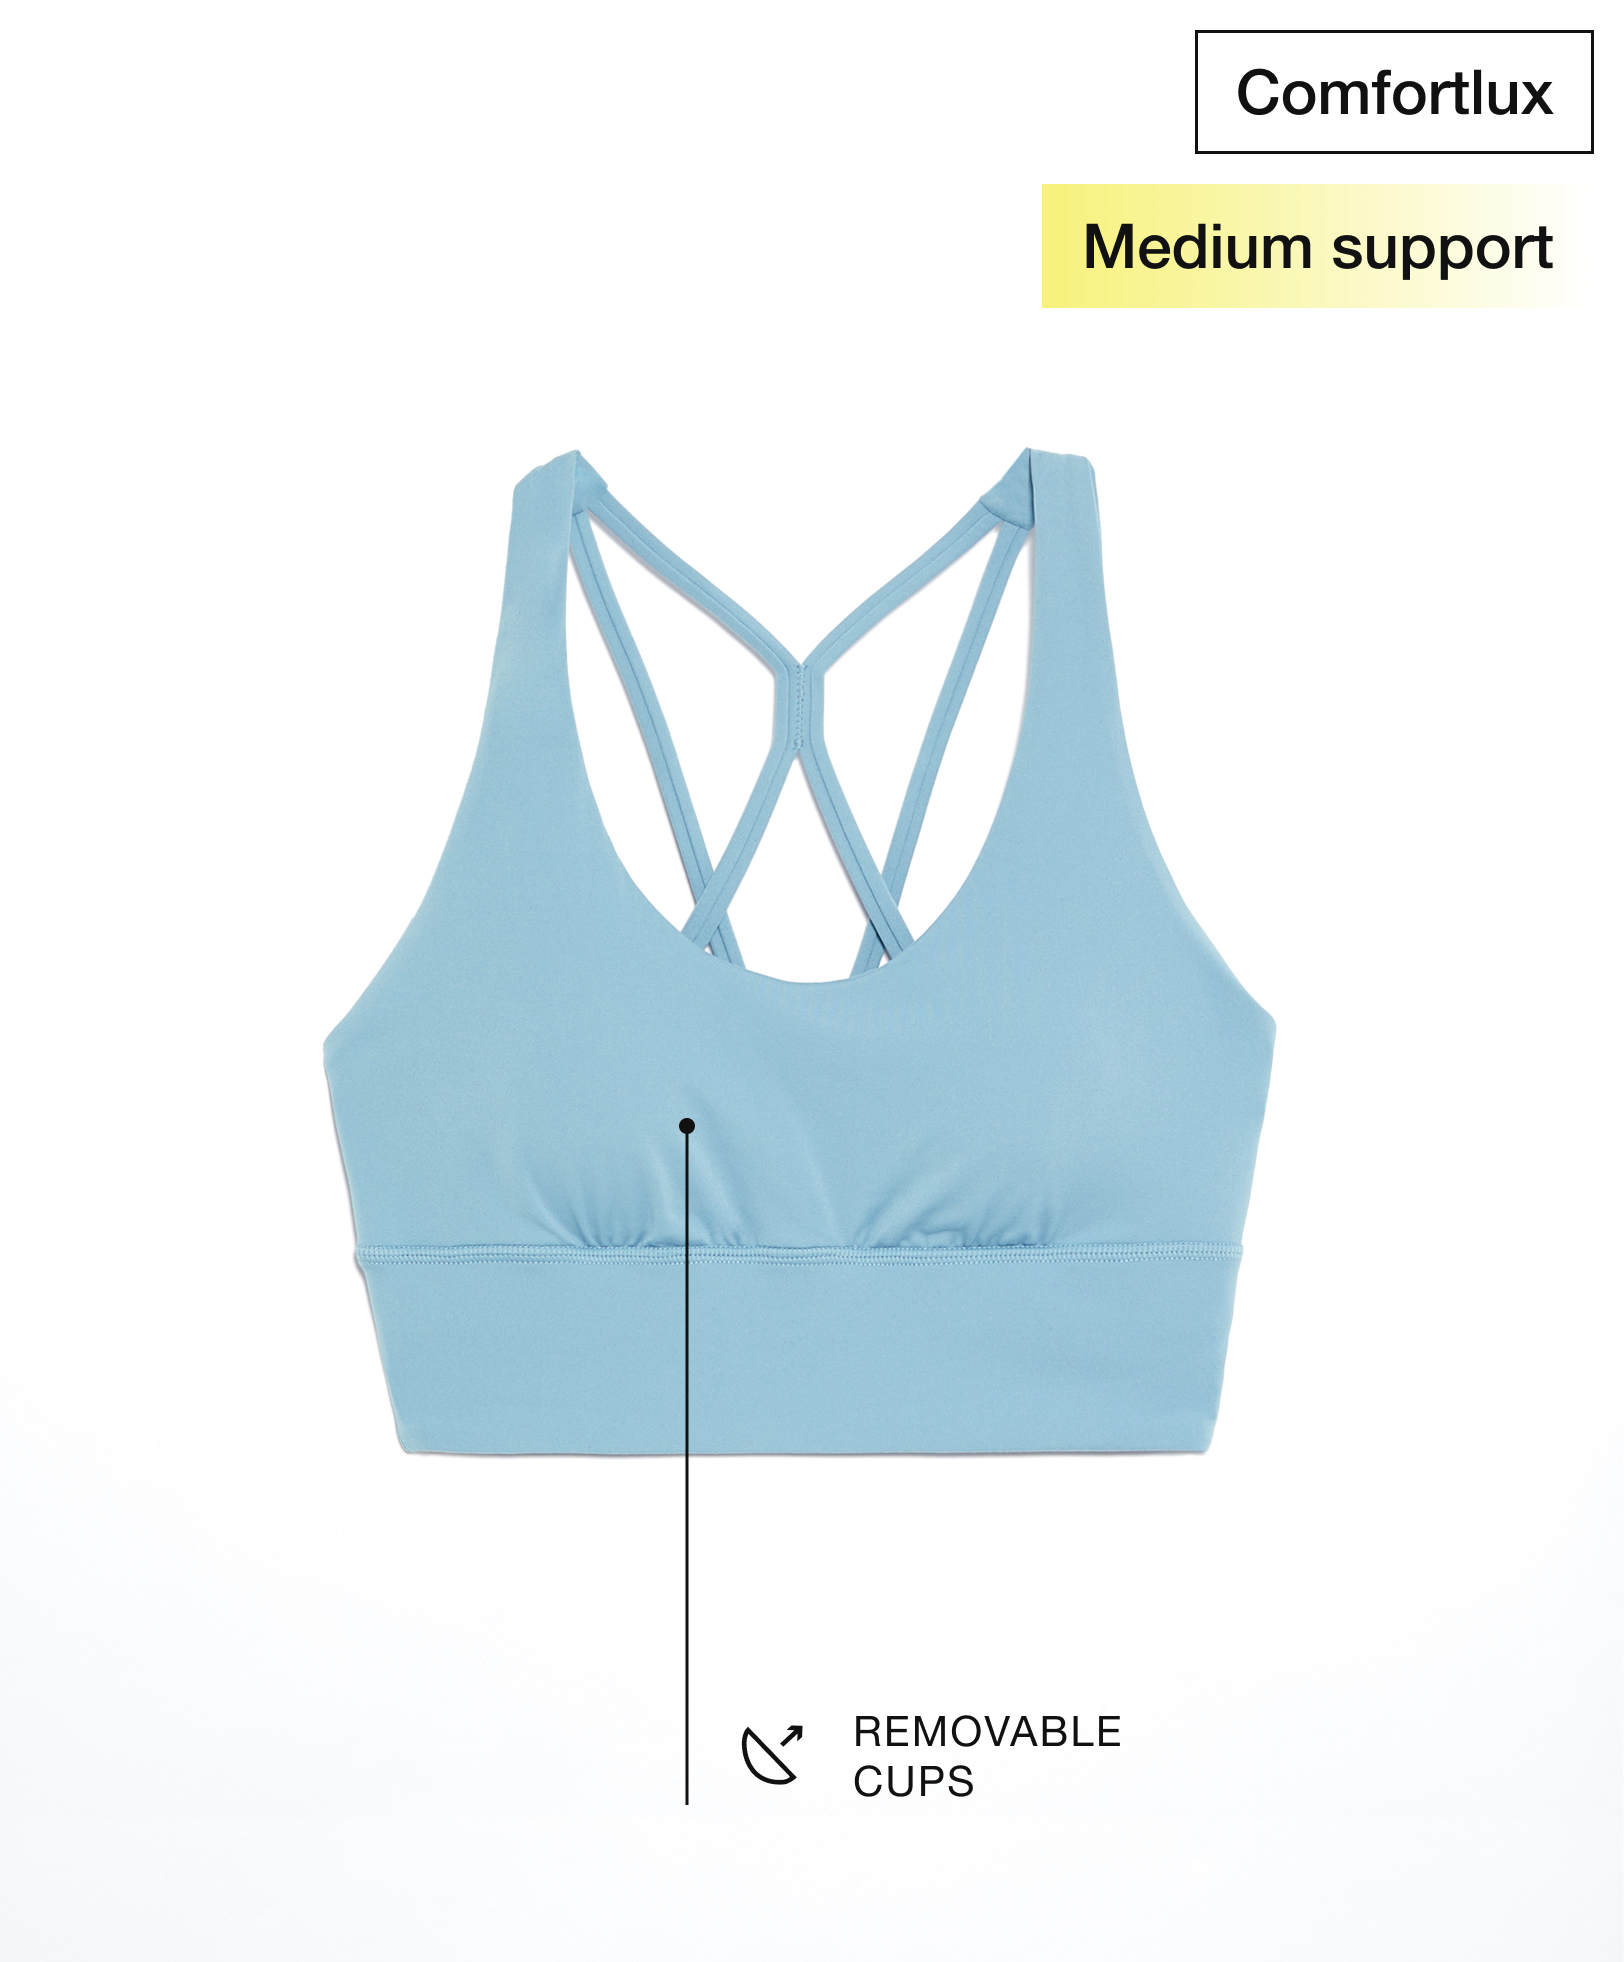 Medium-support comfortlux open-back sports bra with cups